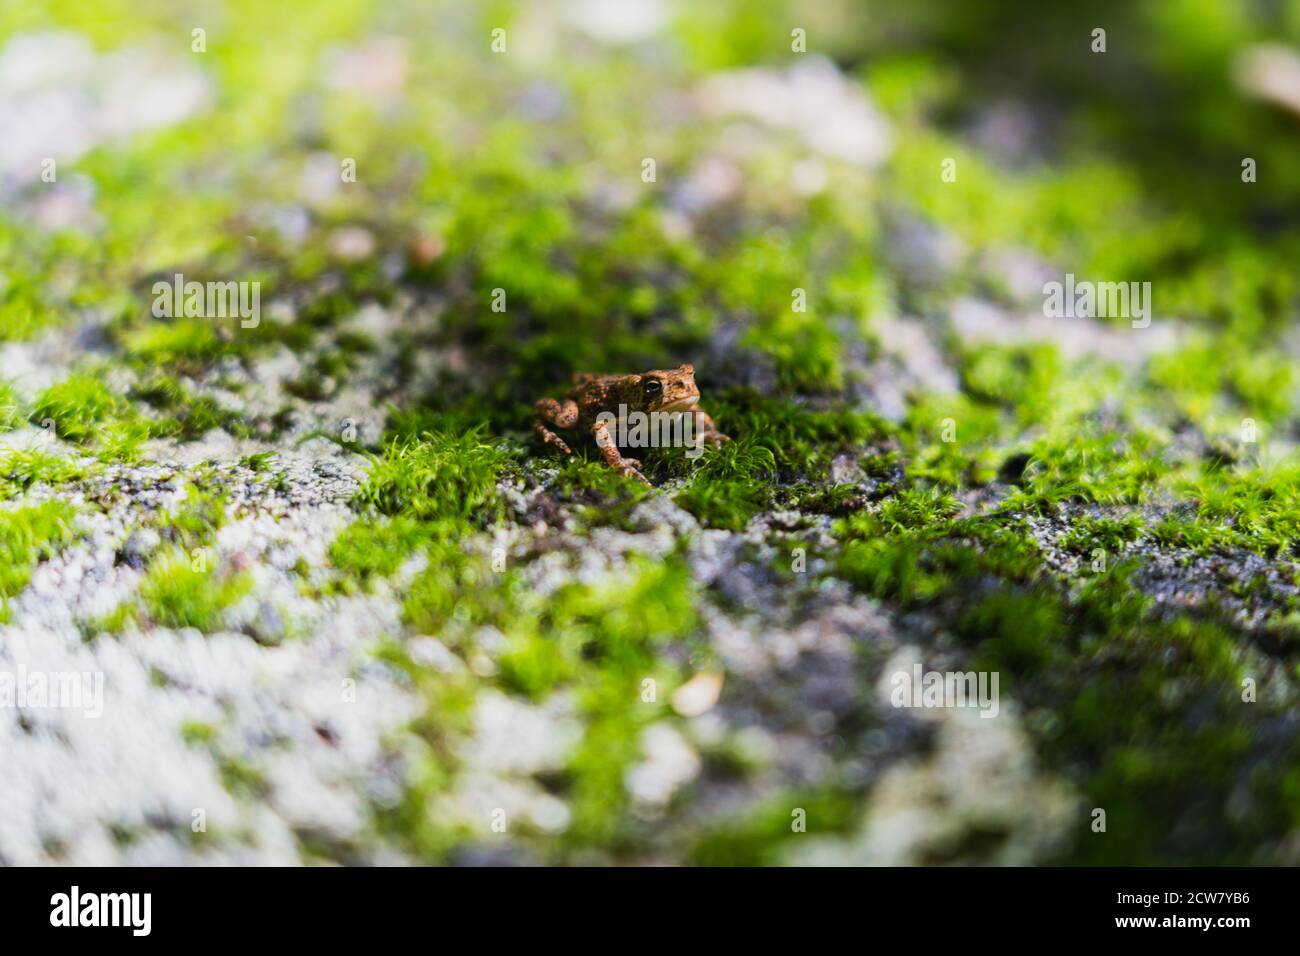 A tiny frog on a bed of moss in the woods Stock Photo